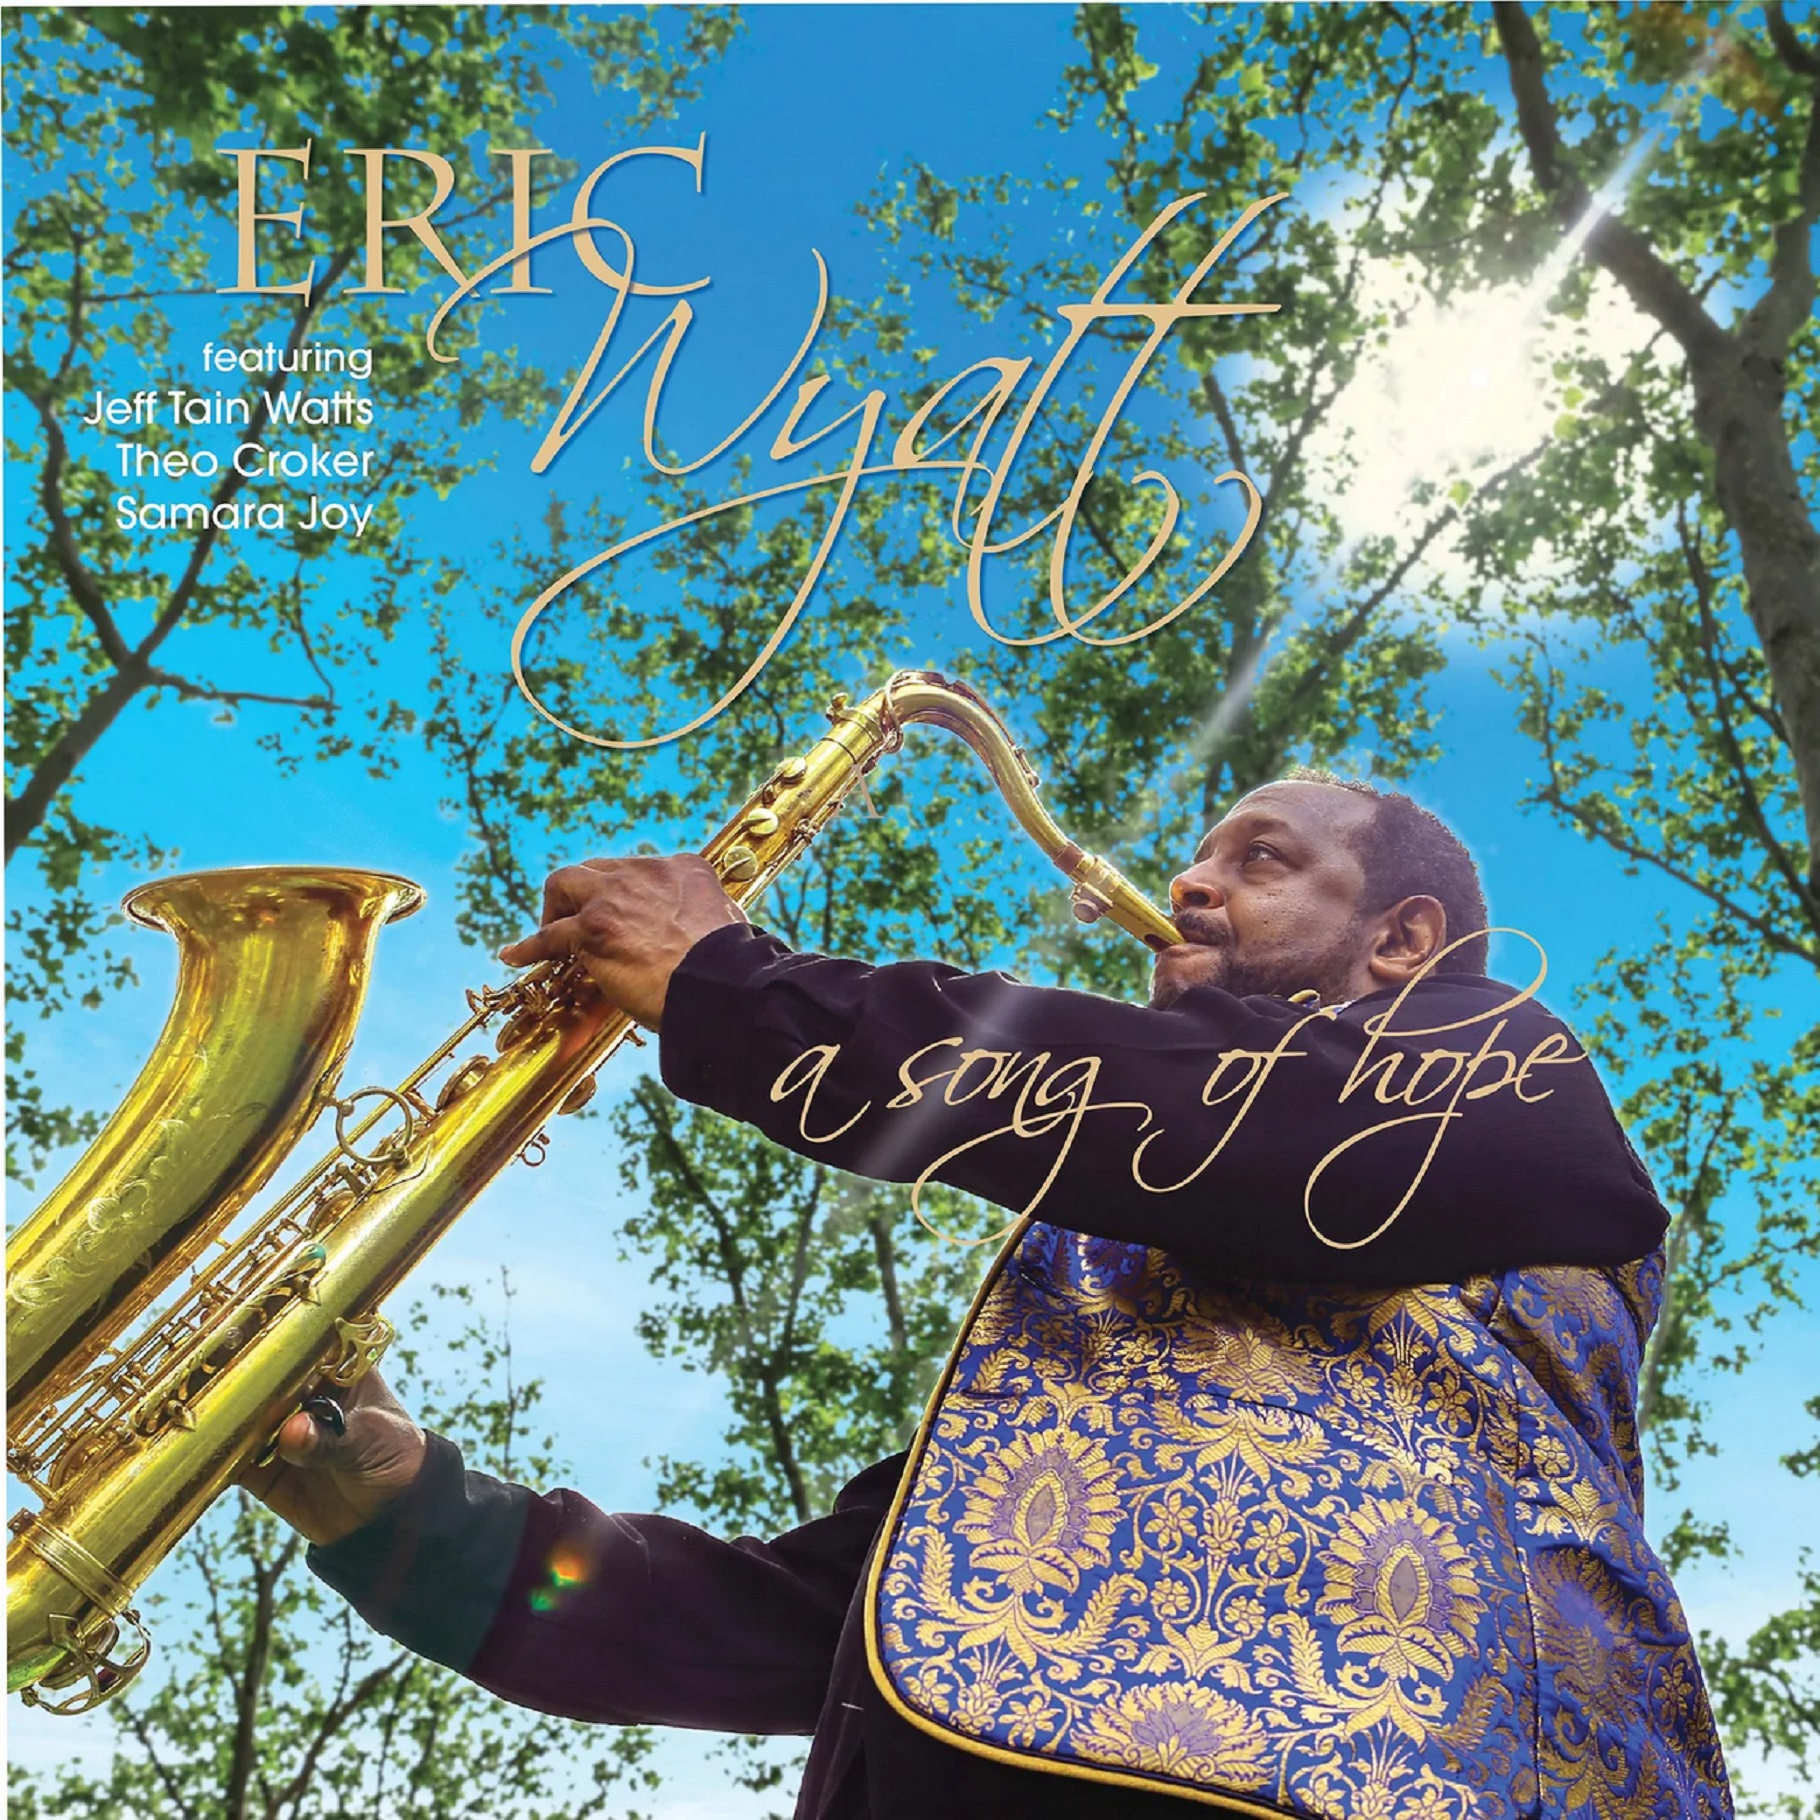 Blowing Some Steam A Song of Hope brings the heat, taking Eric Wyatt to the next level